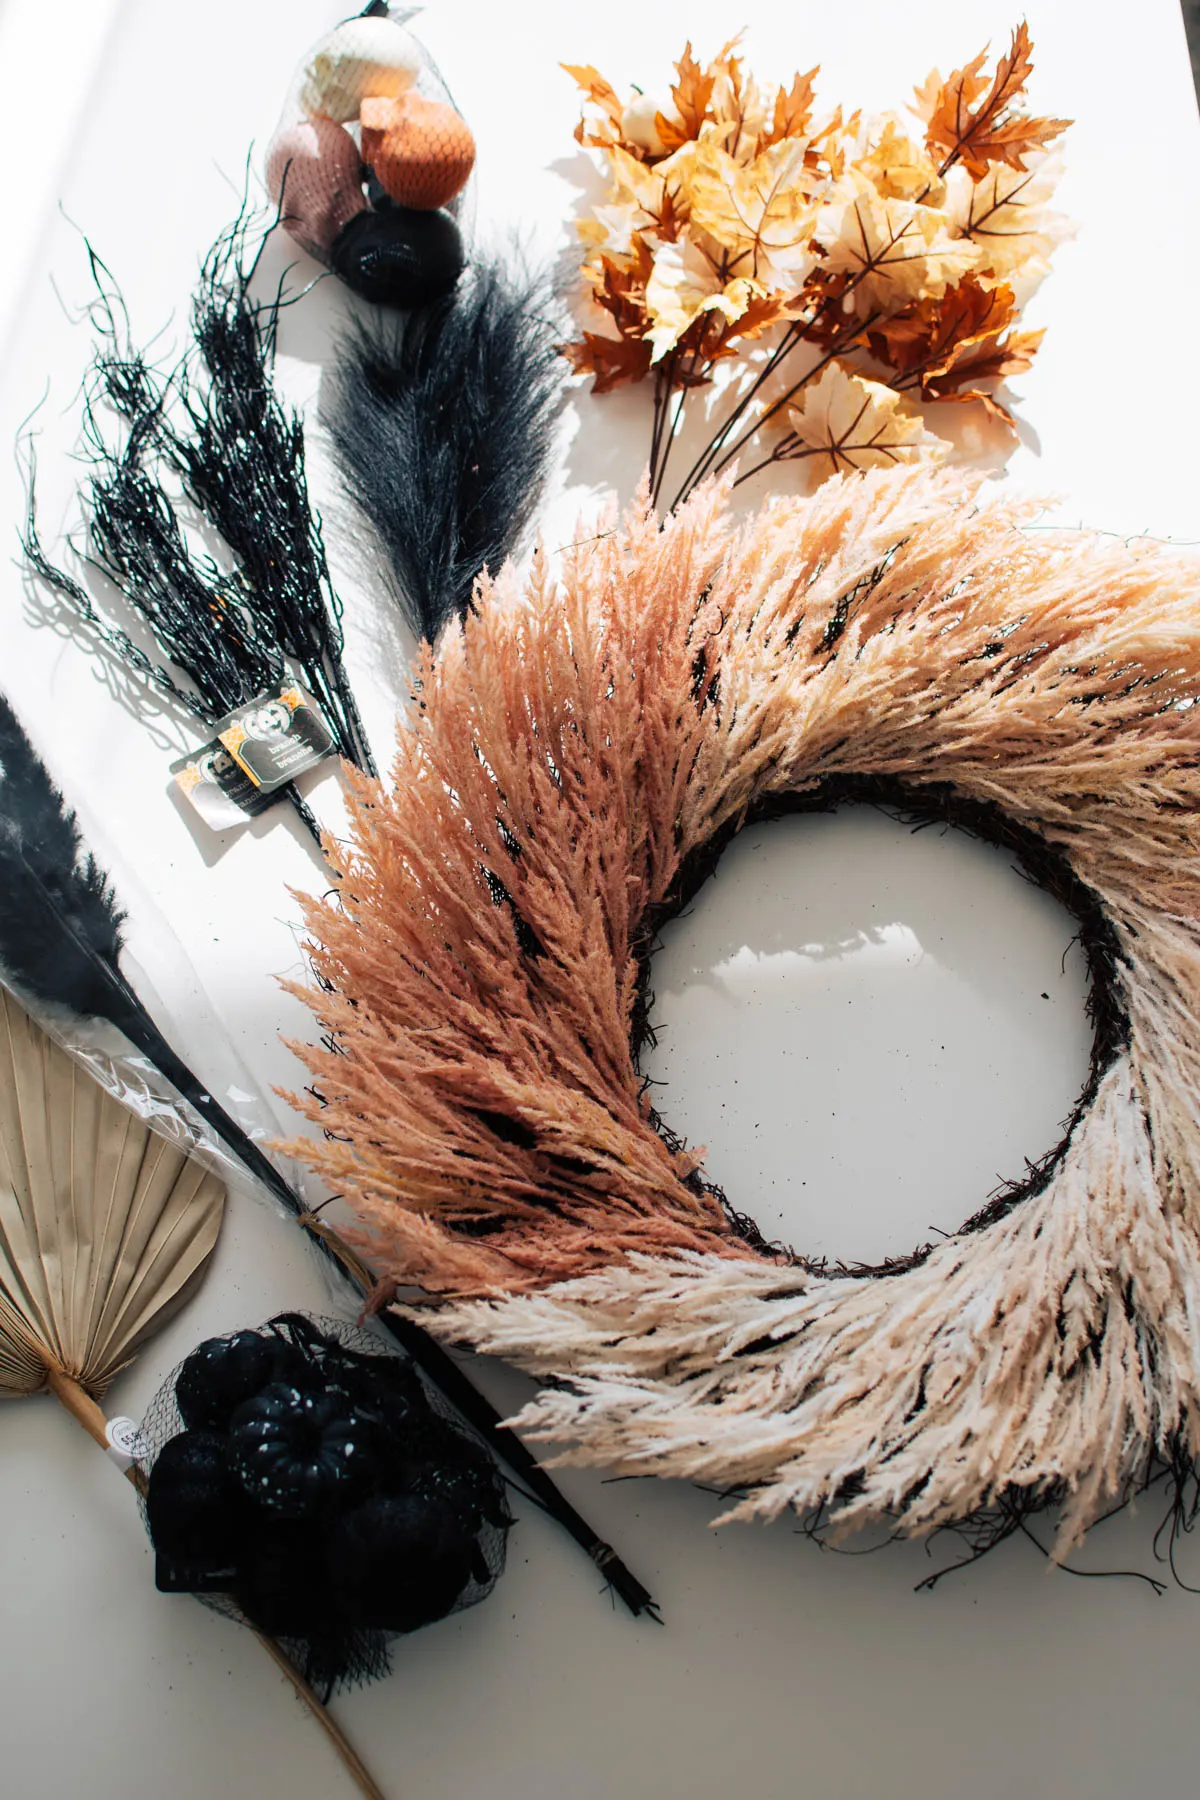 Supplies to make a Halloween wreath including pampas grass, skulls, and leaves.